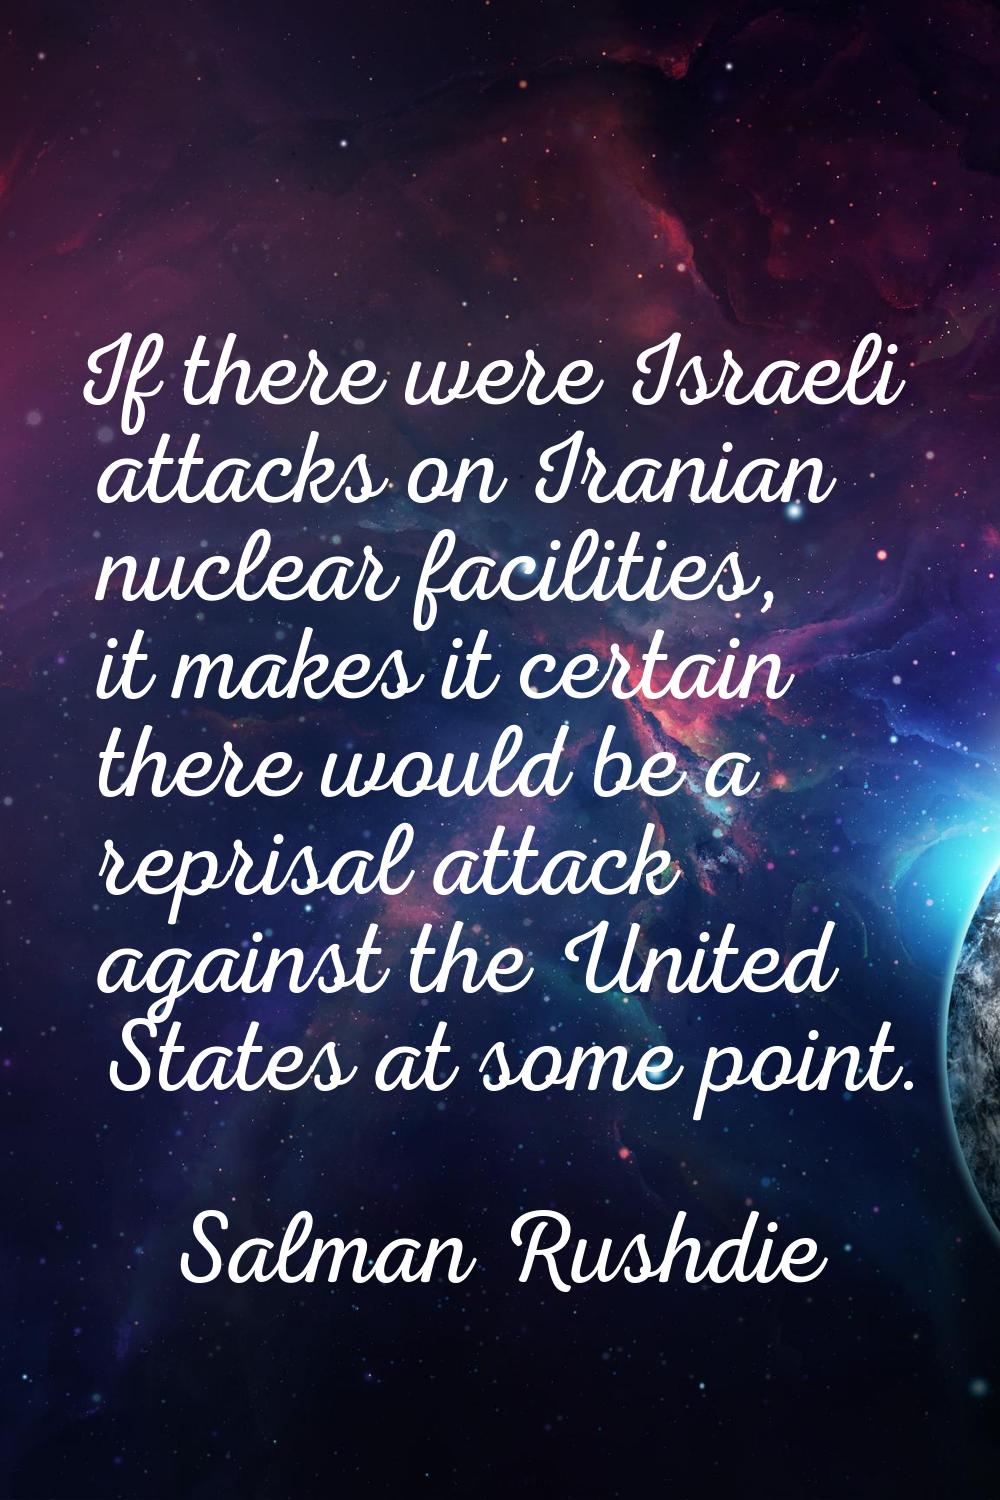 If there were Israeli attacks on Iranian nuclear facilities, it makes it certain there would be a r